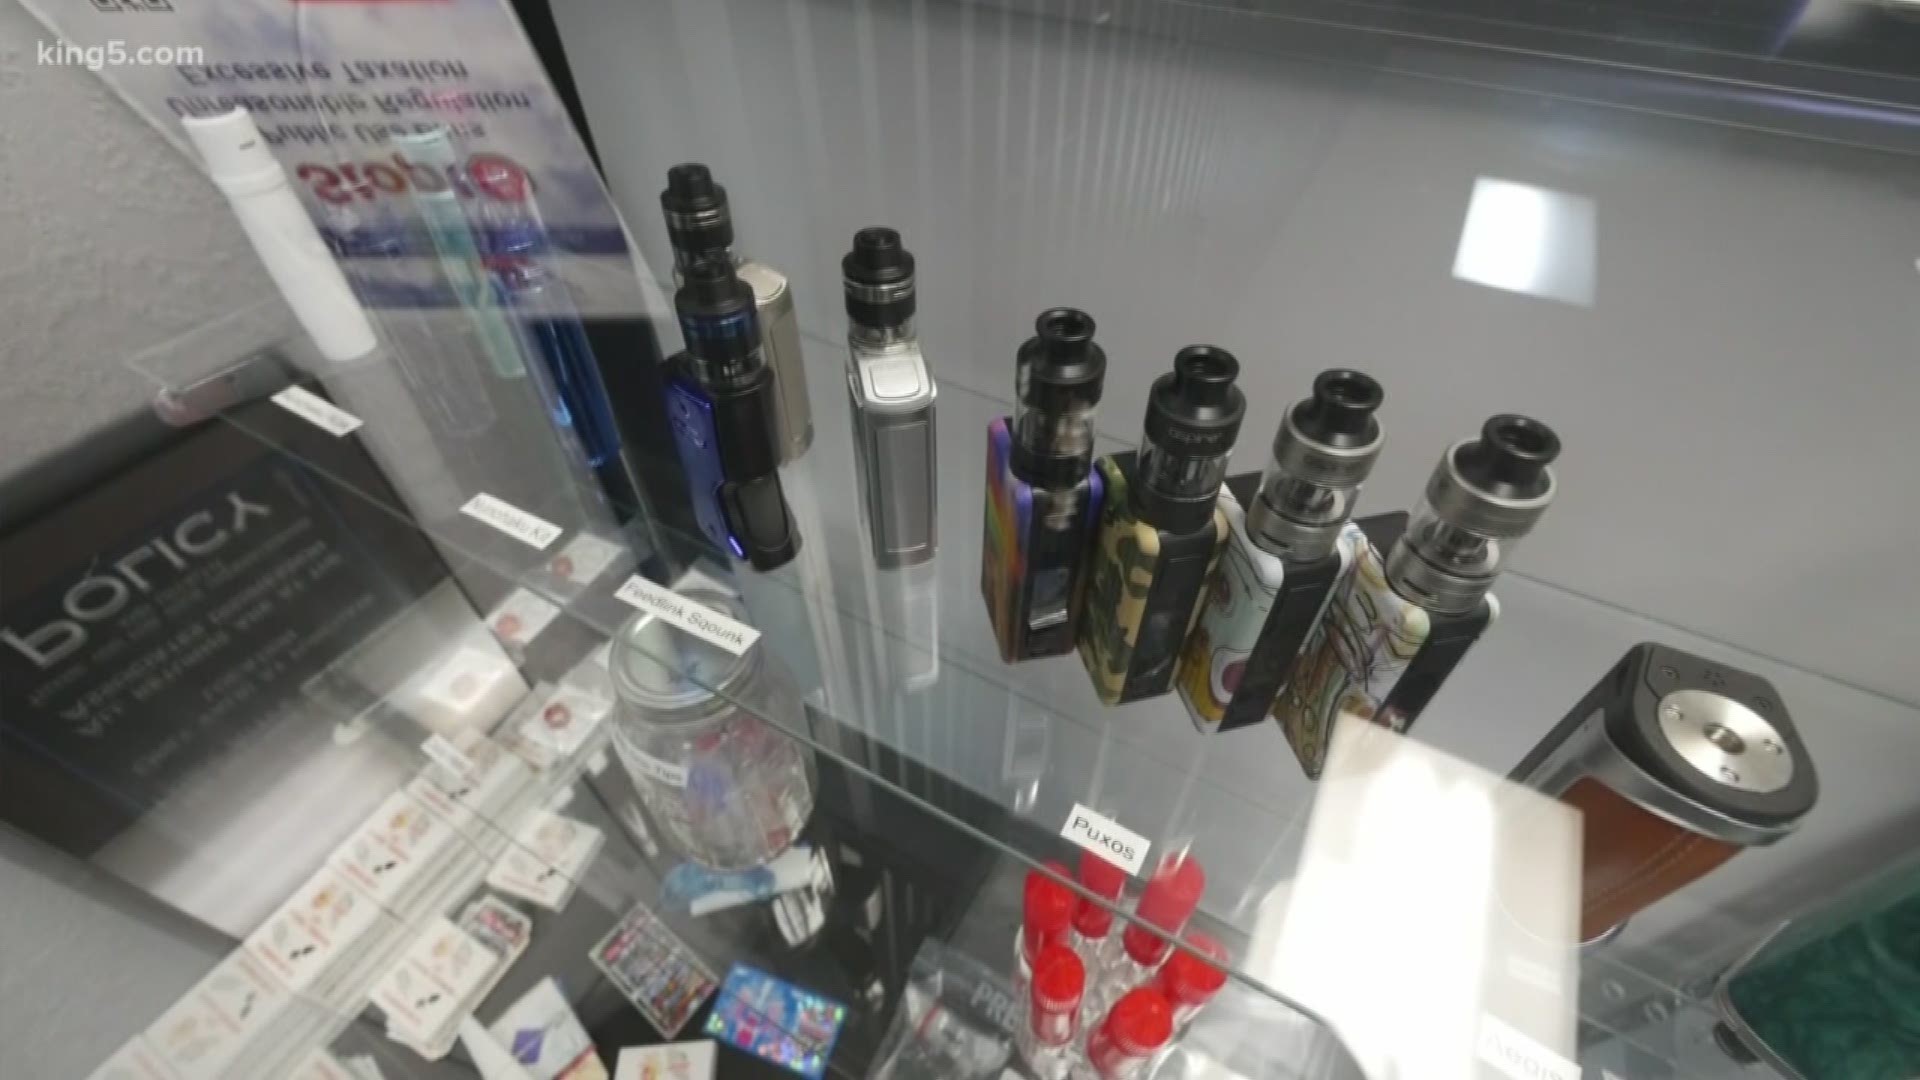 Since the flavored vaping ban, 188 shops have closed.